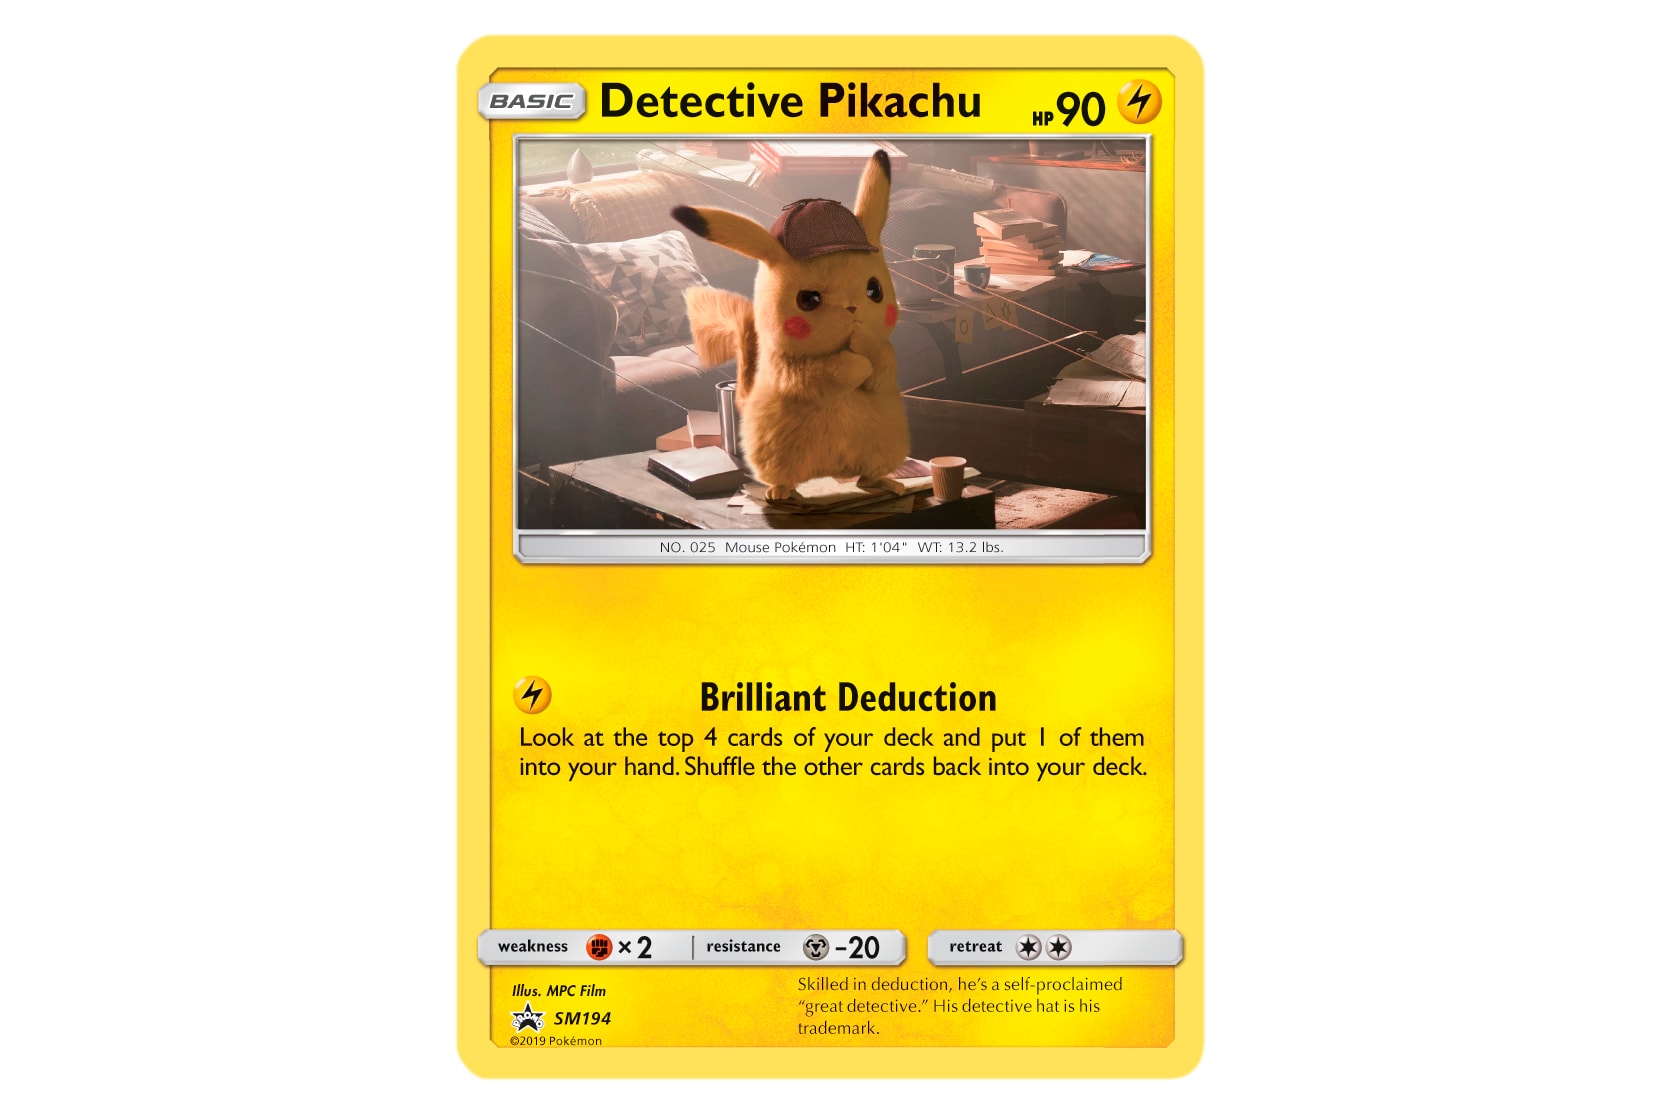 Special 'Detective Pikachu' Merch Release trading cards tees t-shirts pikachu booster packs mewtwo charizard